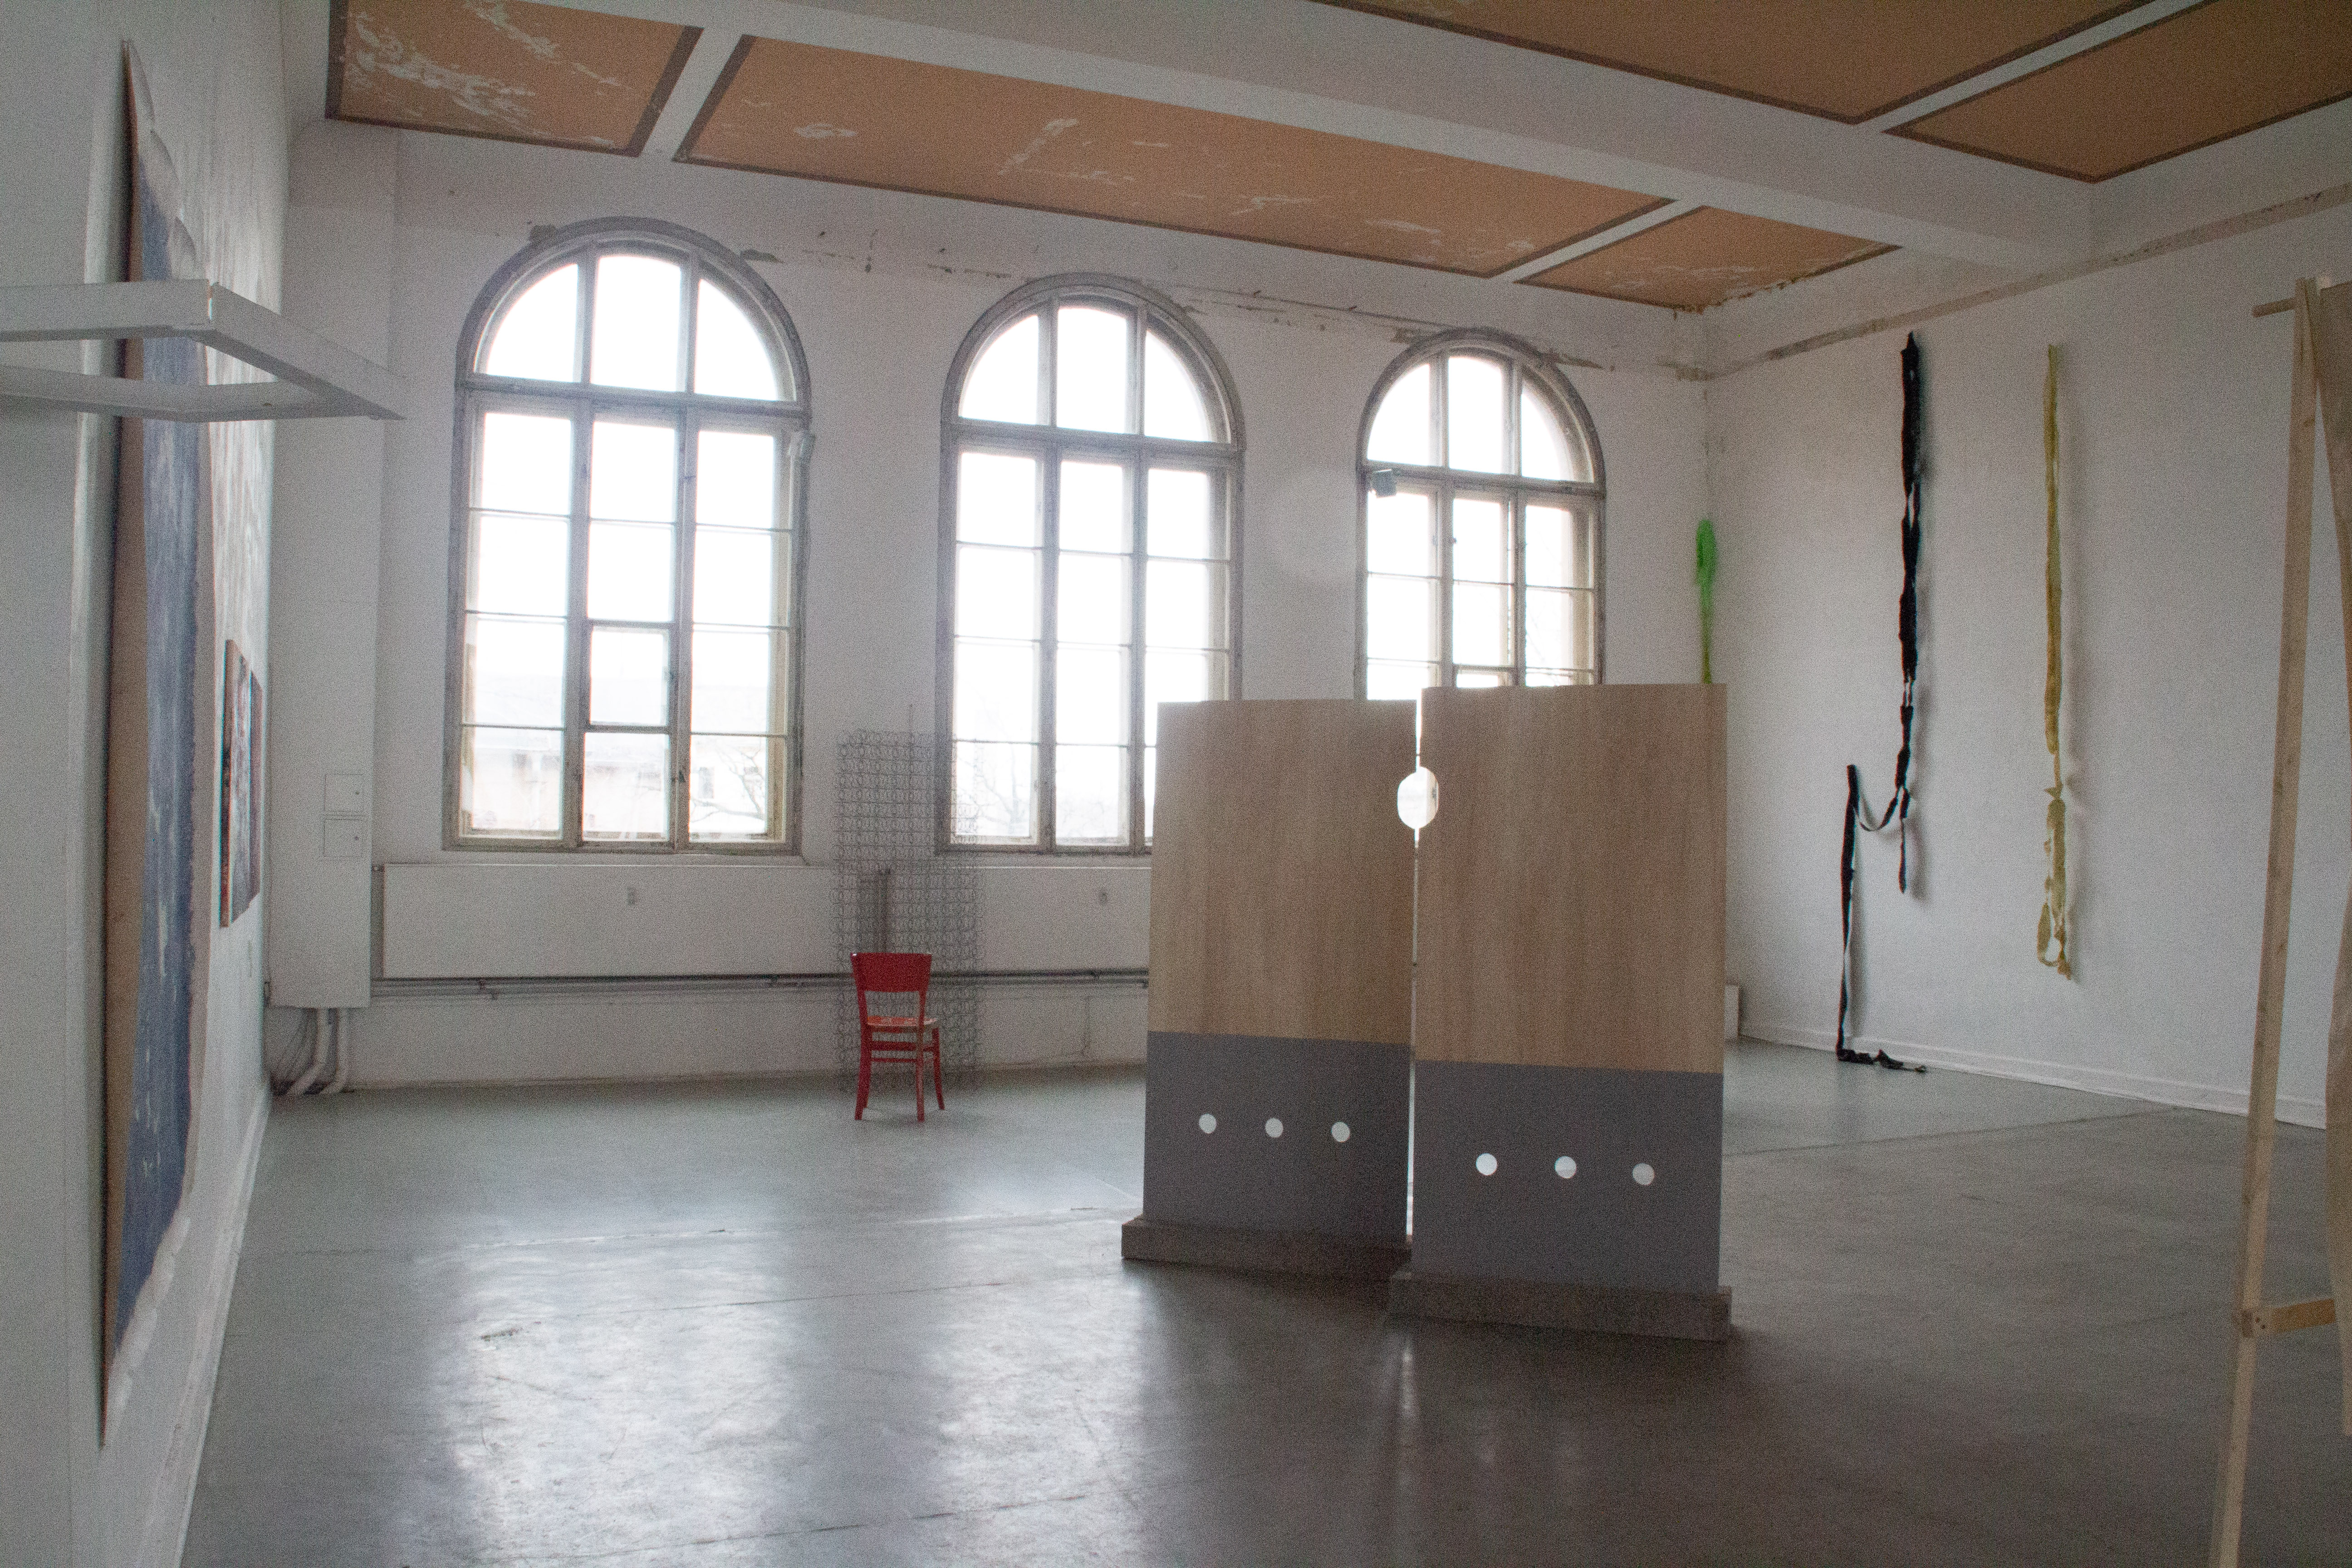 Almost-Tension-installation-view-Alte-Handelsschule-Leipzig-Germany-photo-Natacha-MartIns-for-PILOTENKUECHE-7